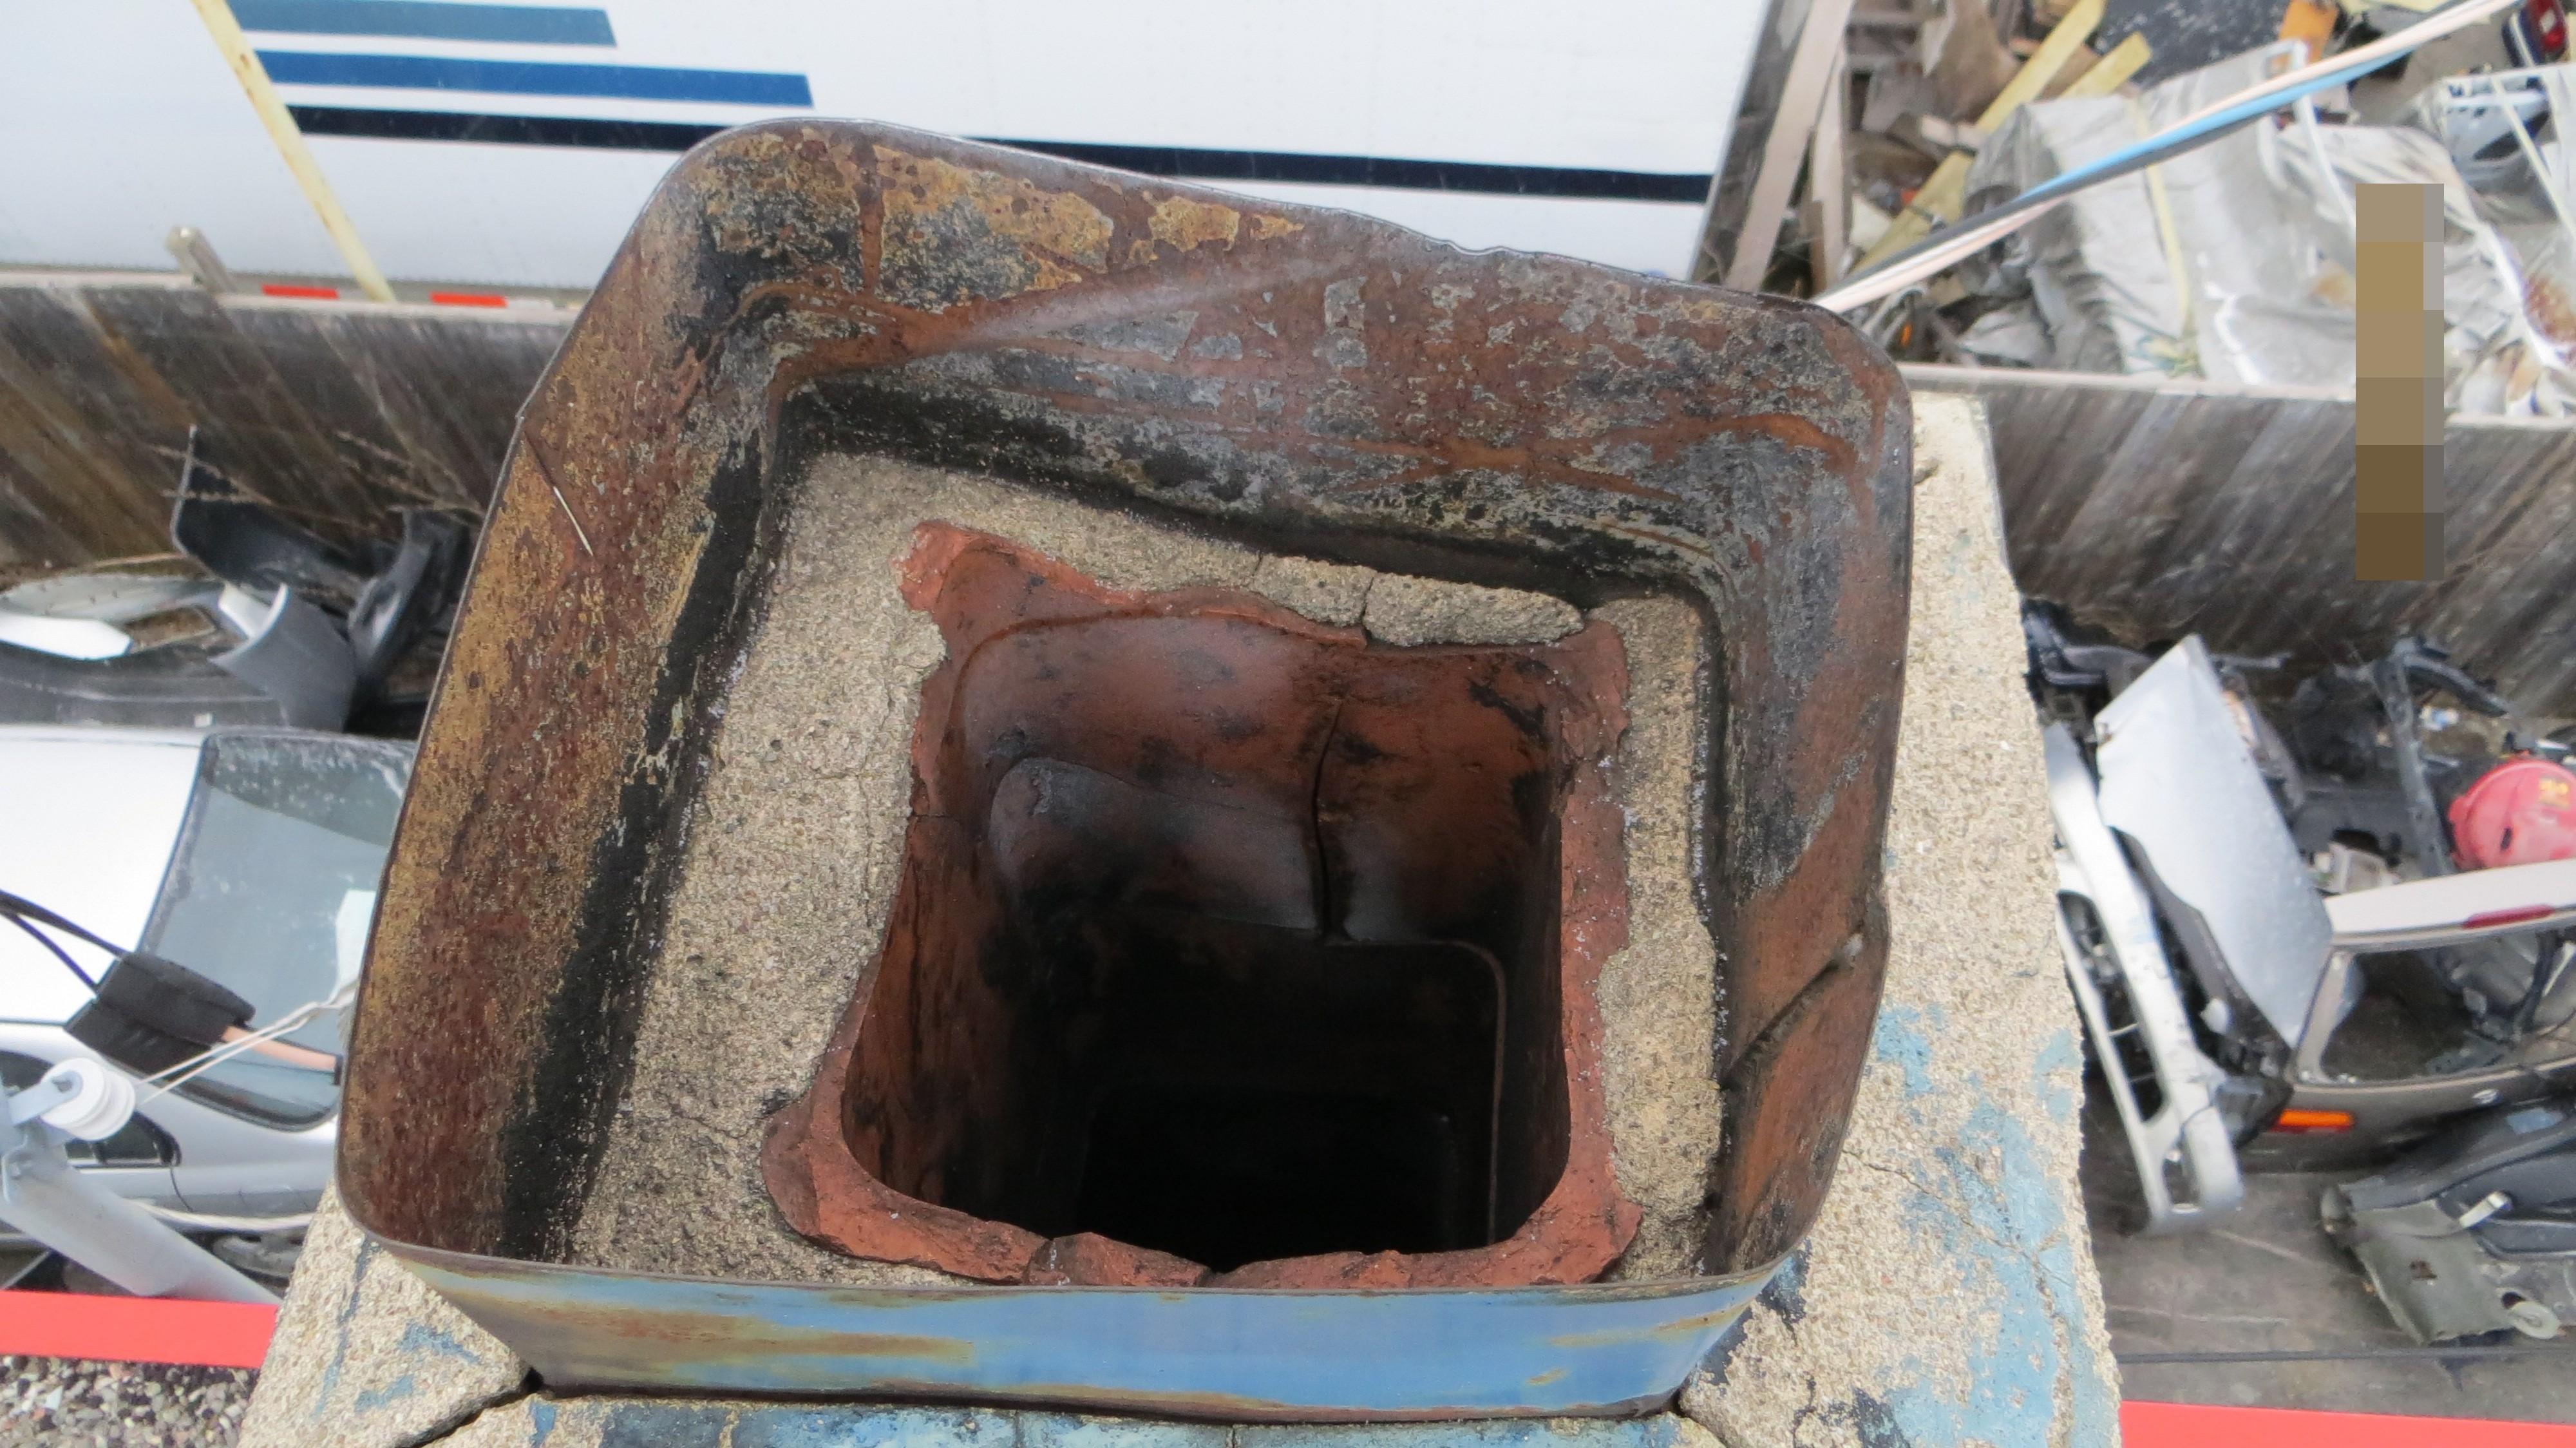 Condition of chimney